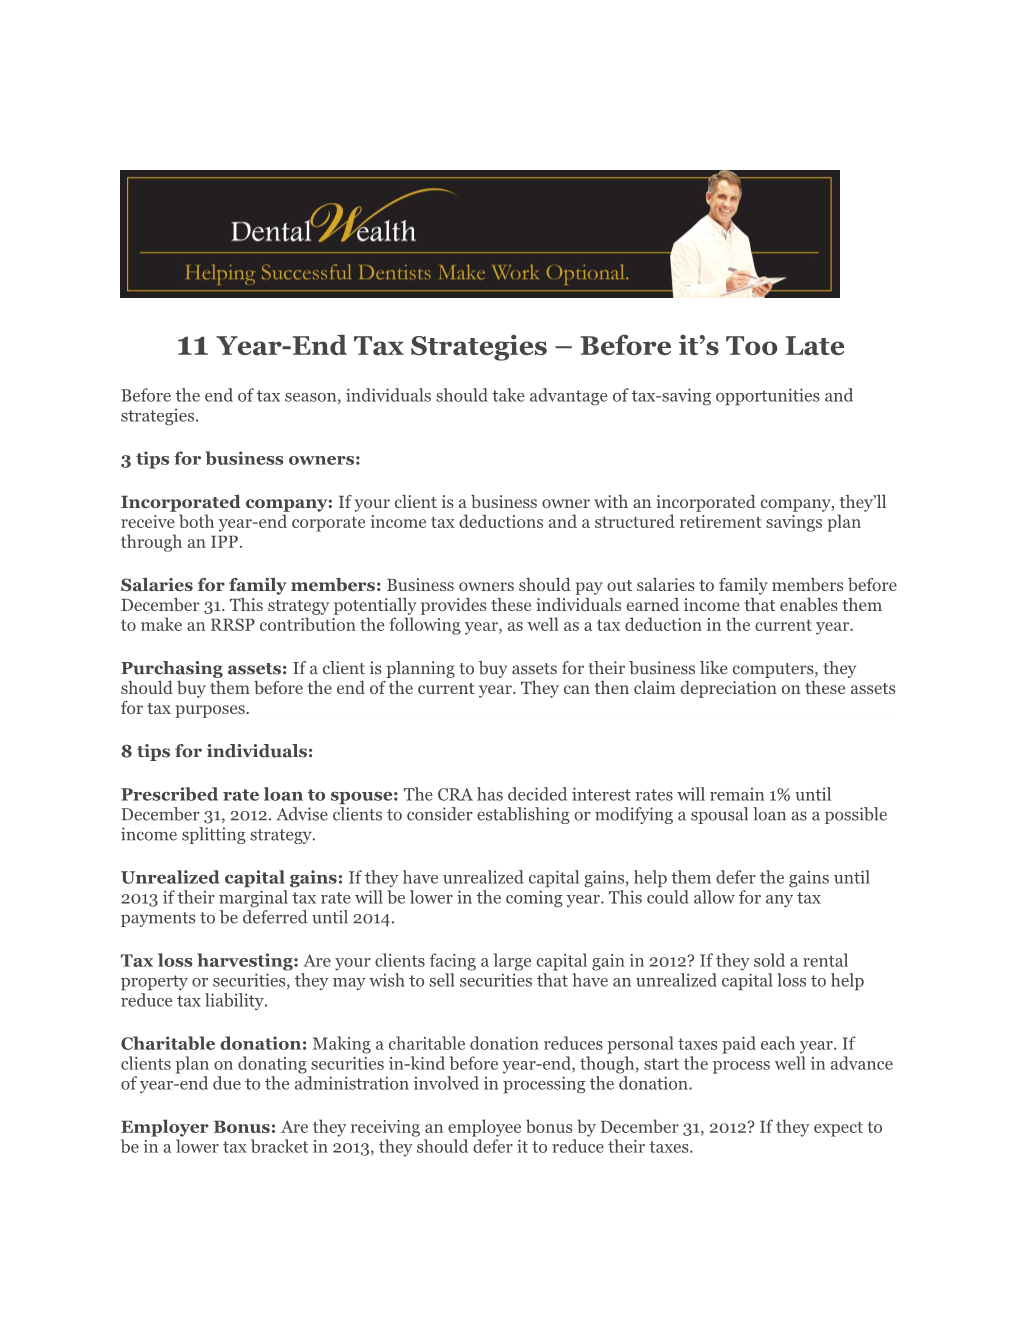 11 Year-End Tax Strategies Before It S Too Late